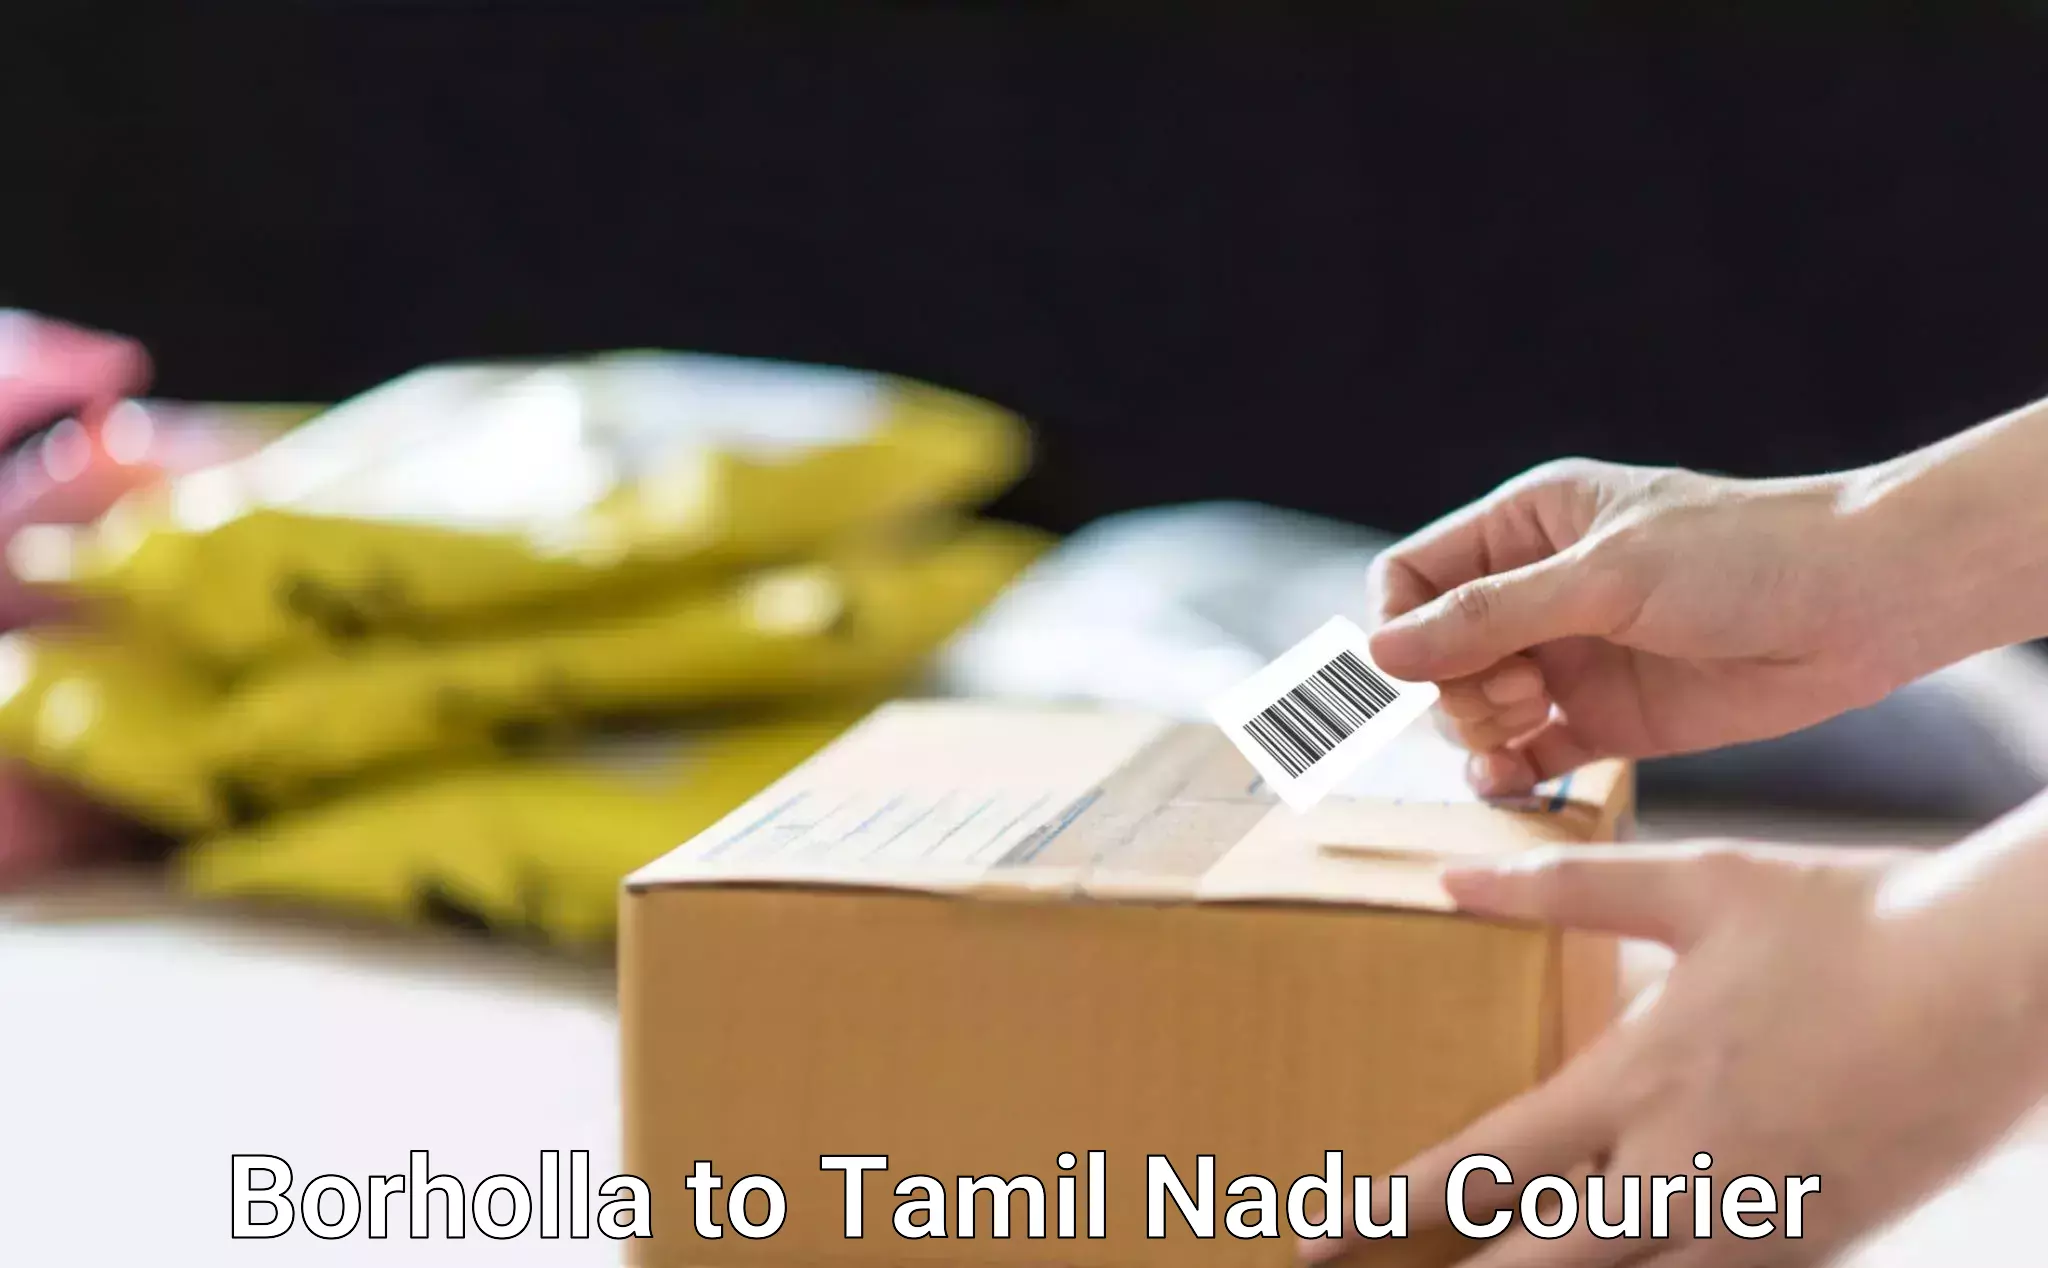 Courier app Borholla to Omalur